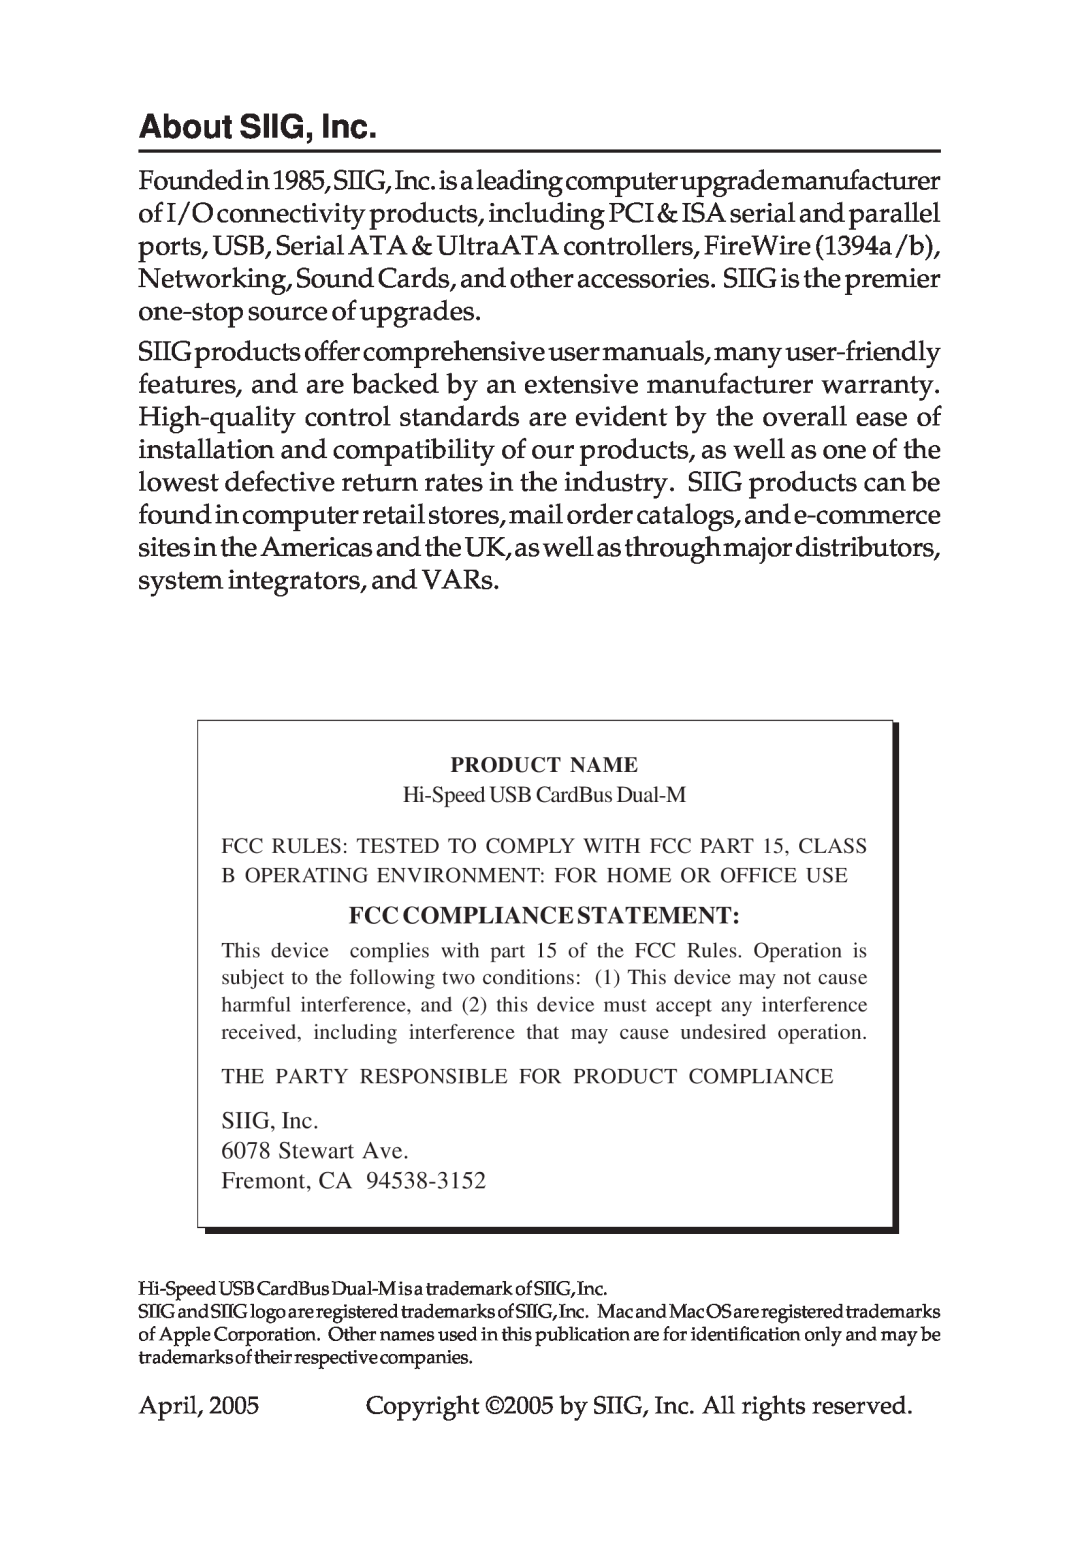 SIIG 04-0381A specifications About SIIG, Inc, Fcc Compliance Statement 